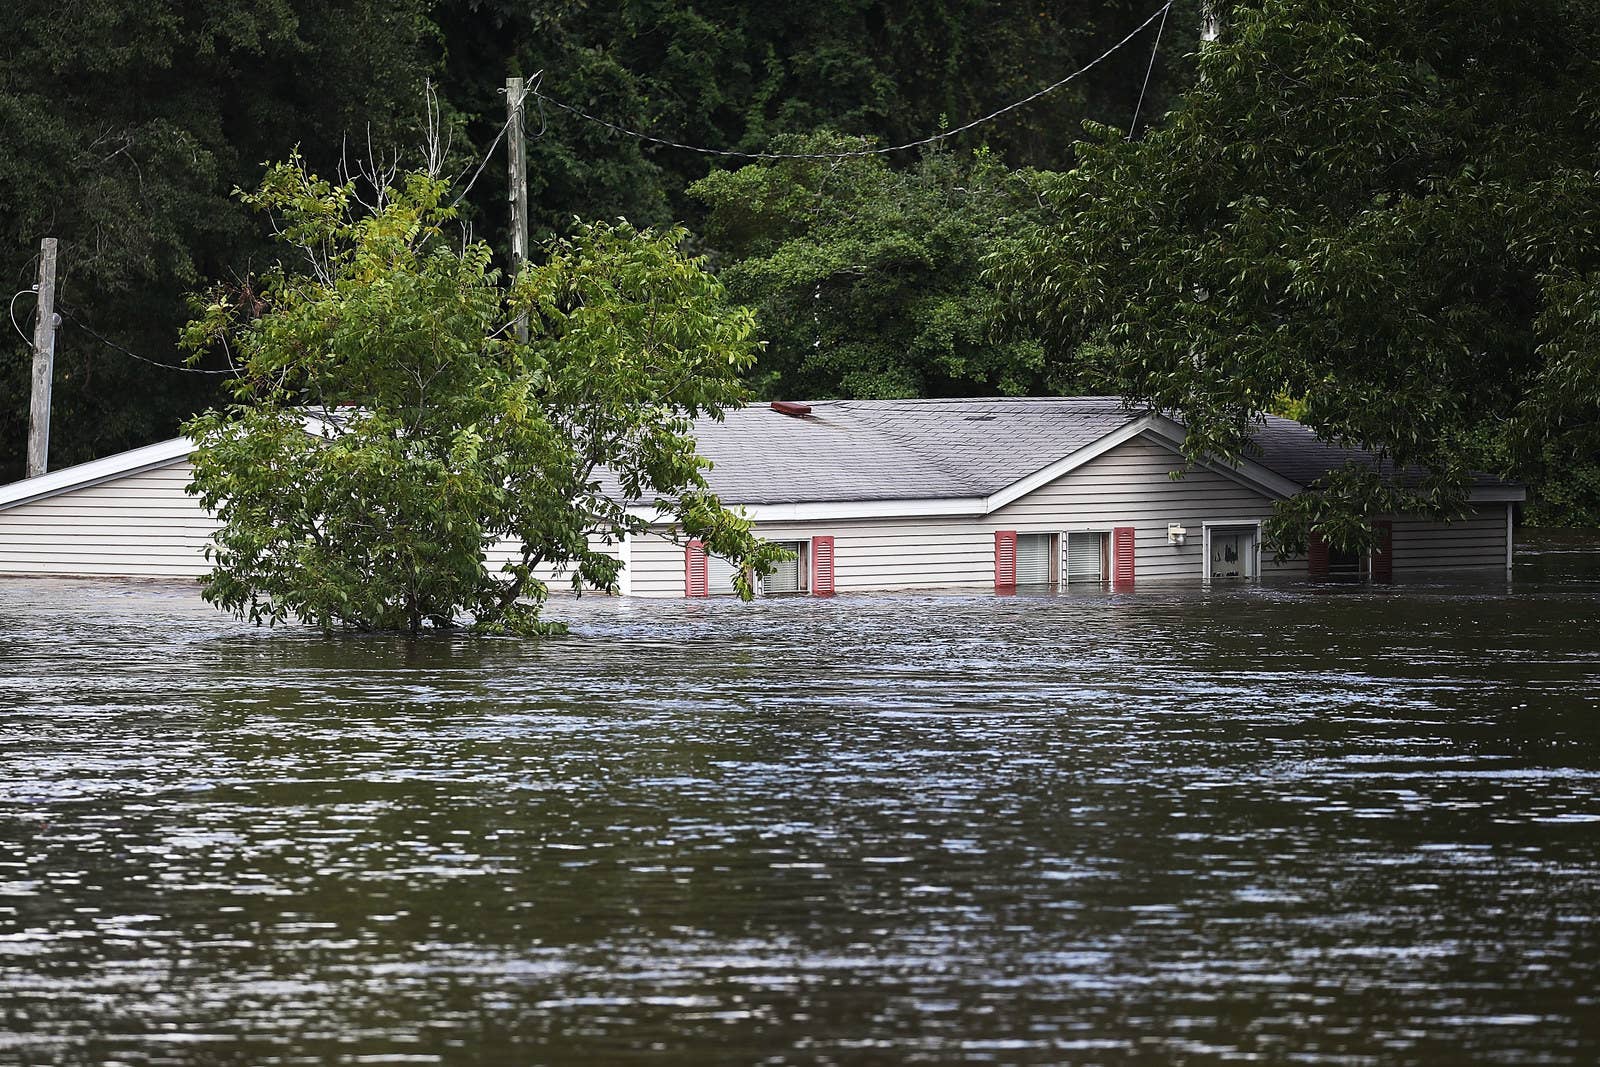 Floodwaters from the cresting Little River inundated the area of Spring Lake, North Carolina, during Hurricane Florence, Sept. 17.